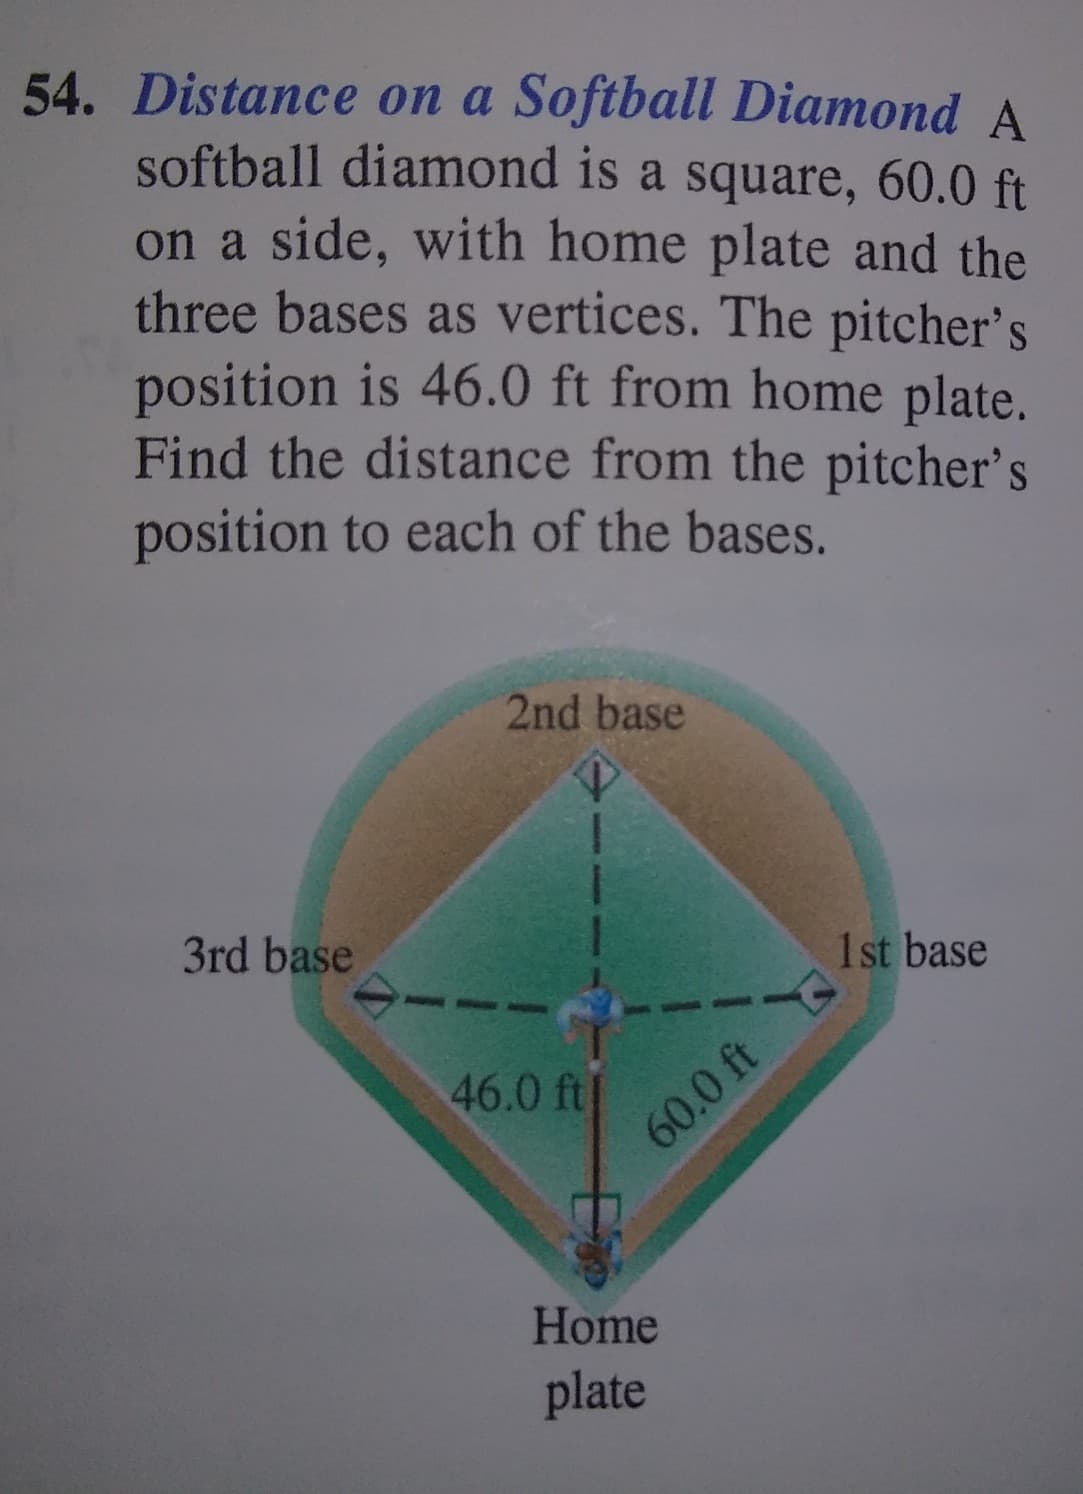 54. Distance on a Softball Diamond A
softball diamond is a square, 60.0 ft
on a side, with home plate and the
three bases as vertices. The pitcher's
position is 46.0 ft from home plate.
Find the distance from the pitcher's
position to each of the bases.
2nd base
3rd base
1st base
46.0 ft|
60.0 ft
Home
plate
